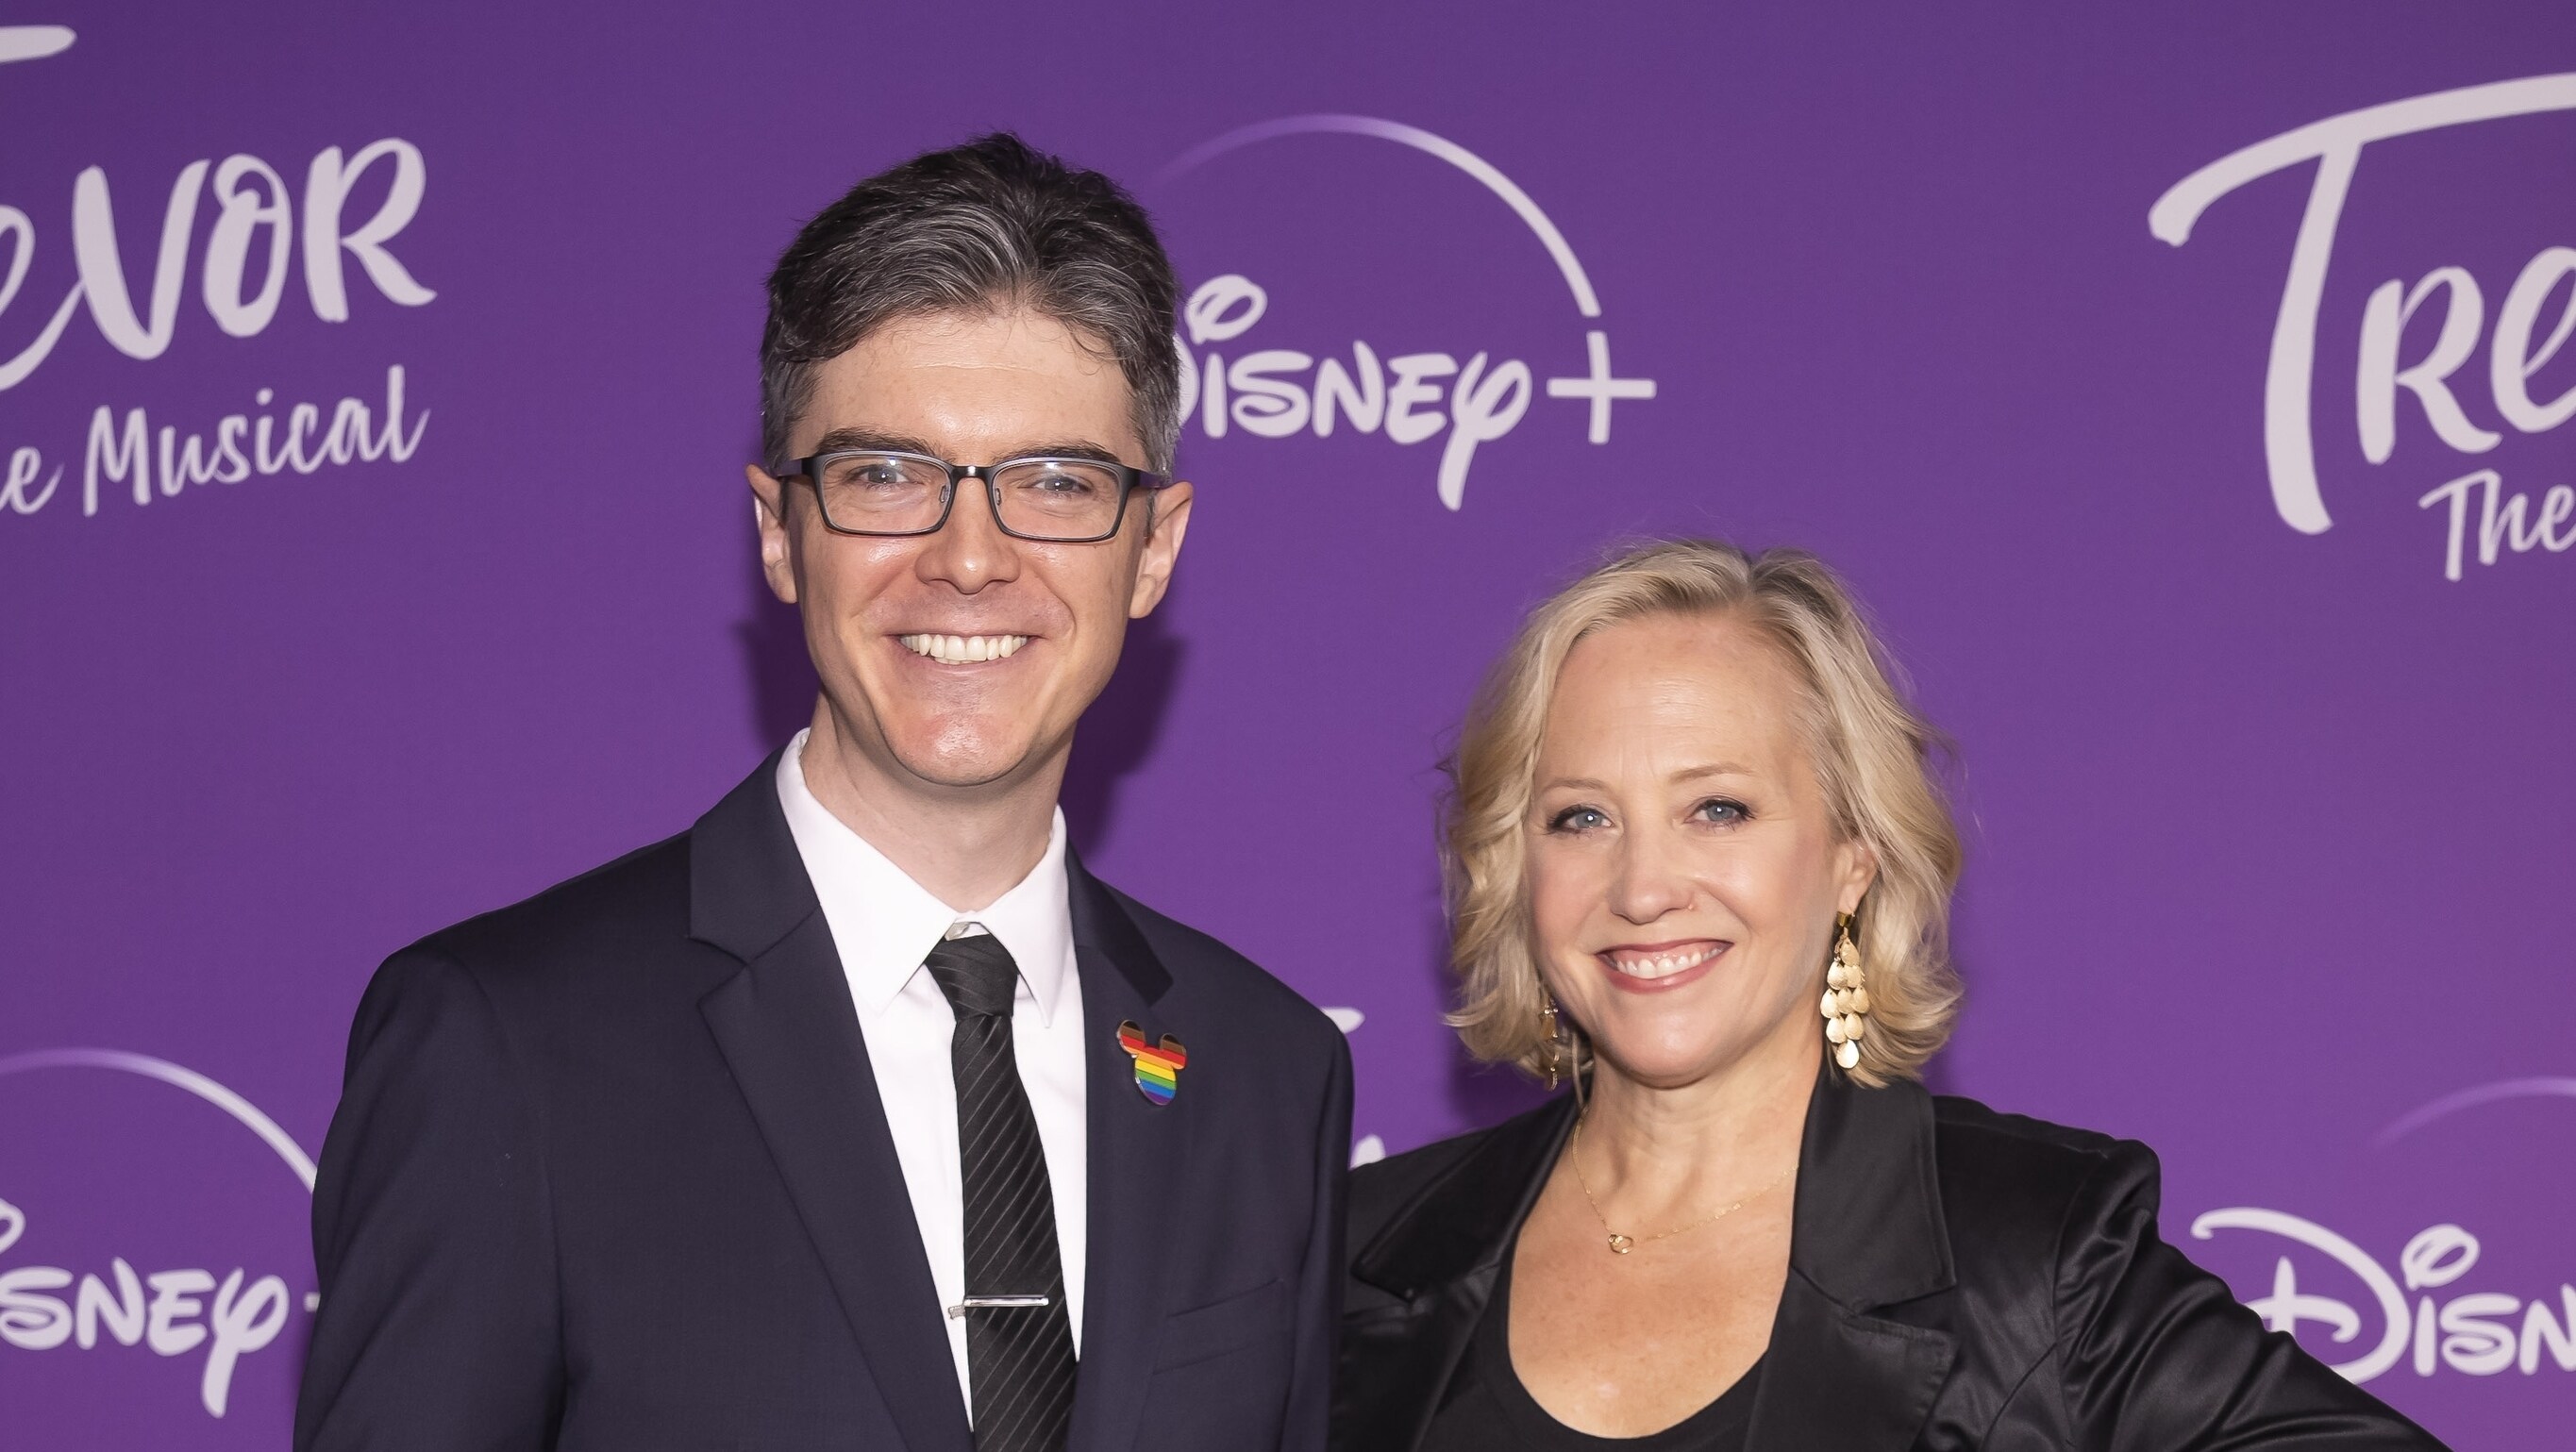 6/20/22: Disney+ “Trevor: The Musical” Photo-Op and Special Screening